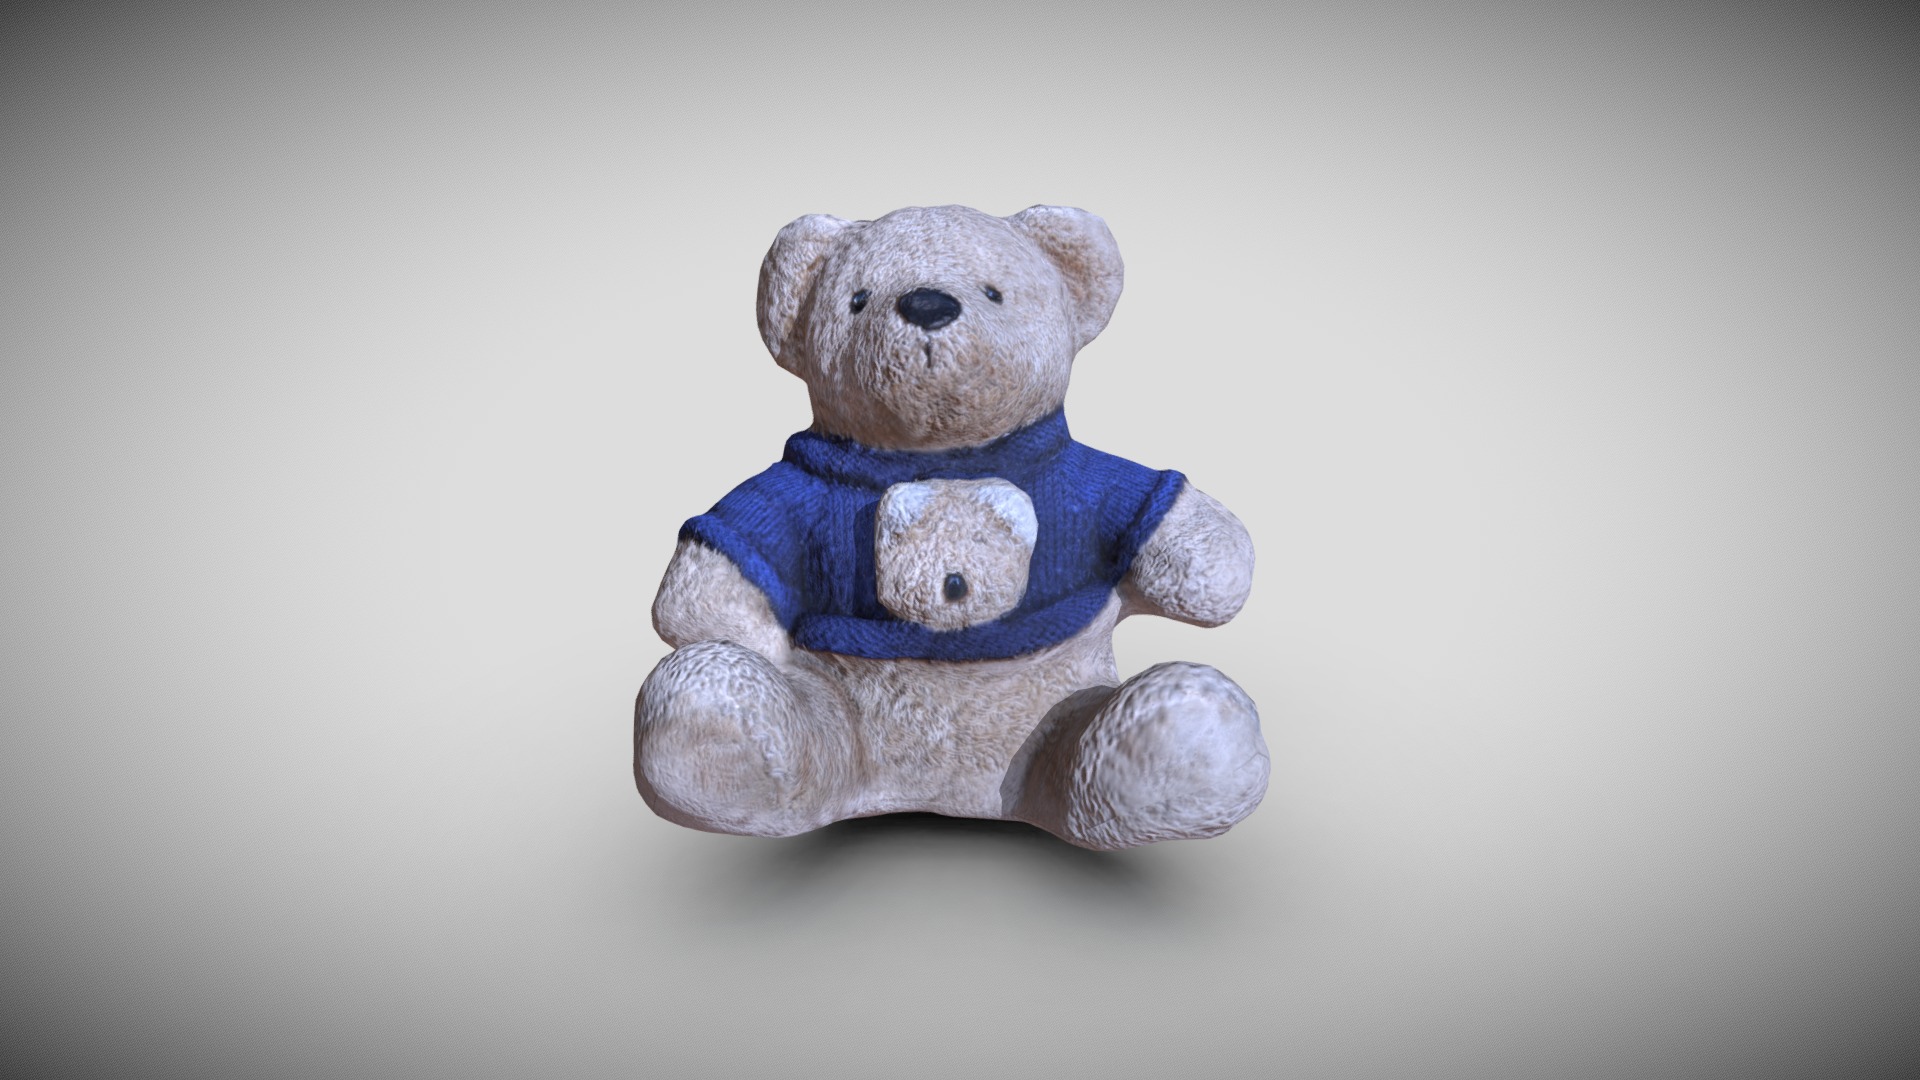 3D model Teddybear Scan Polished - This is a 3D model of the Teddybear Scan Polished. The 3D model is about a teddy bear wearing a blue shirt.